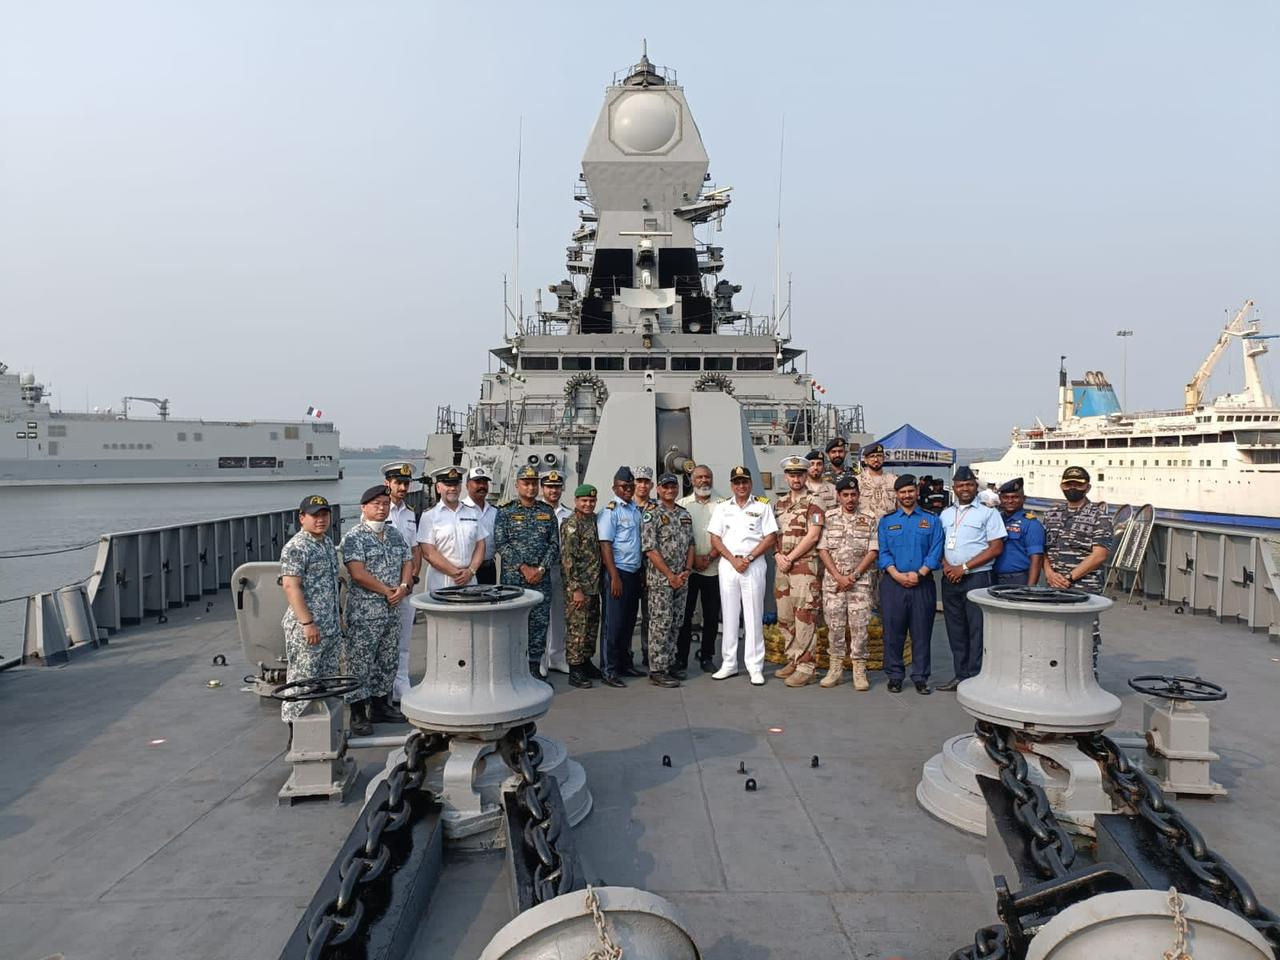 Indian Ocean Naval Symposium (IONS) Maritime Exercise 2022 (IMEX-22) was conducted at Goa and in Arabian Sea